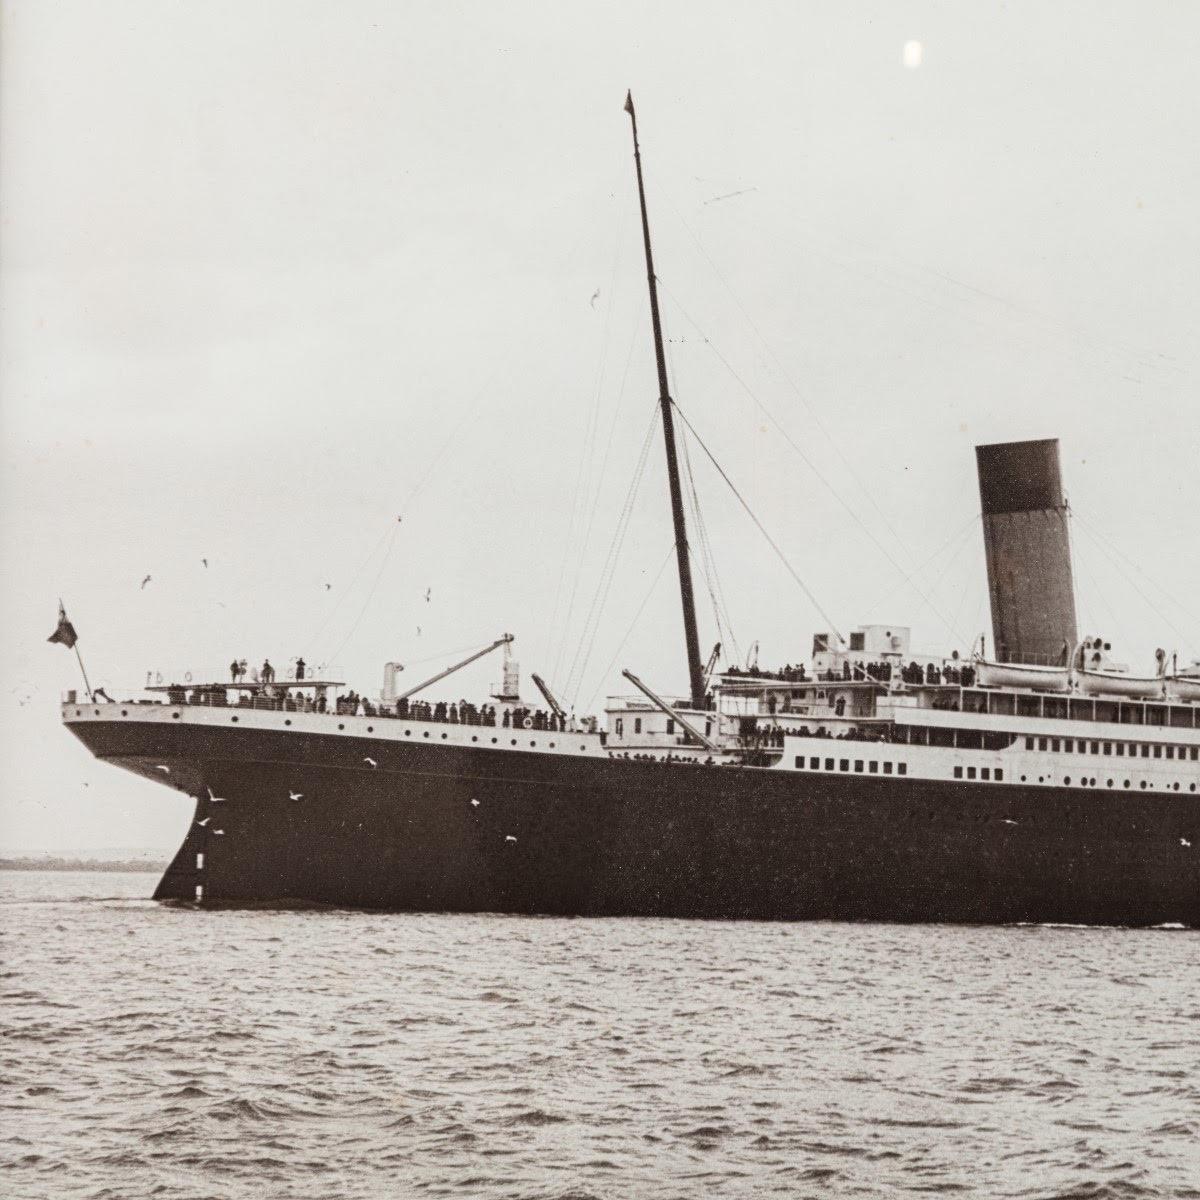 An original photograph of R.M.S. Titanic by Beken of Cowes